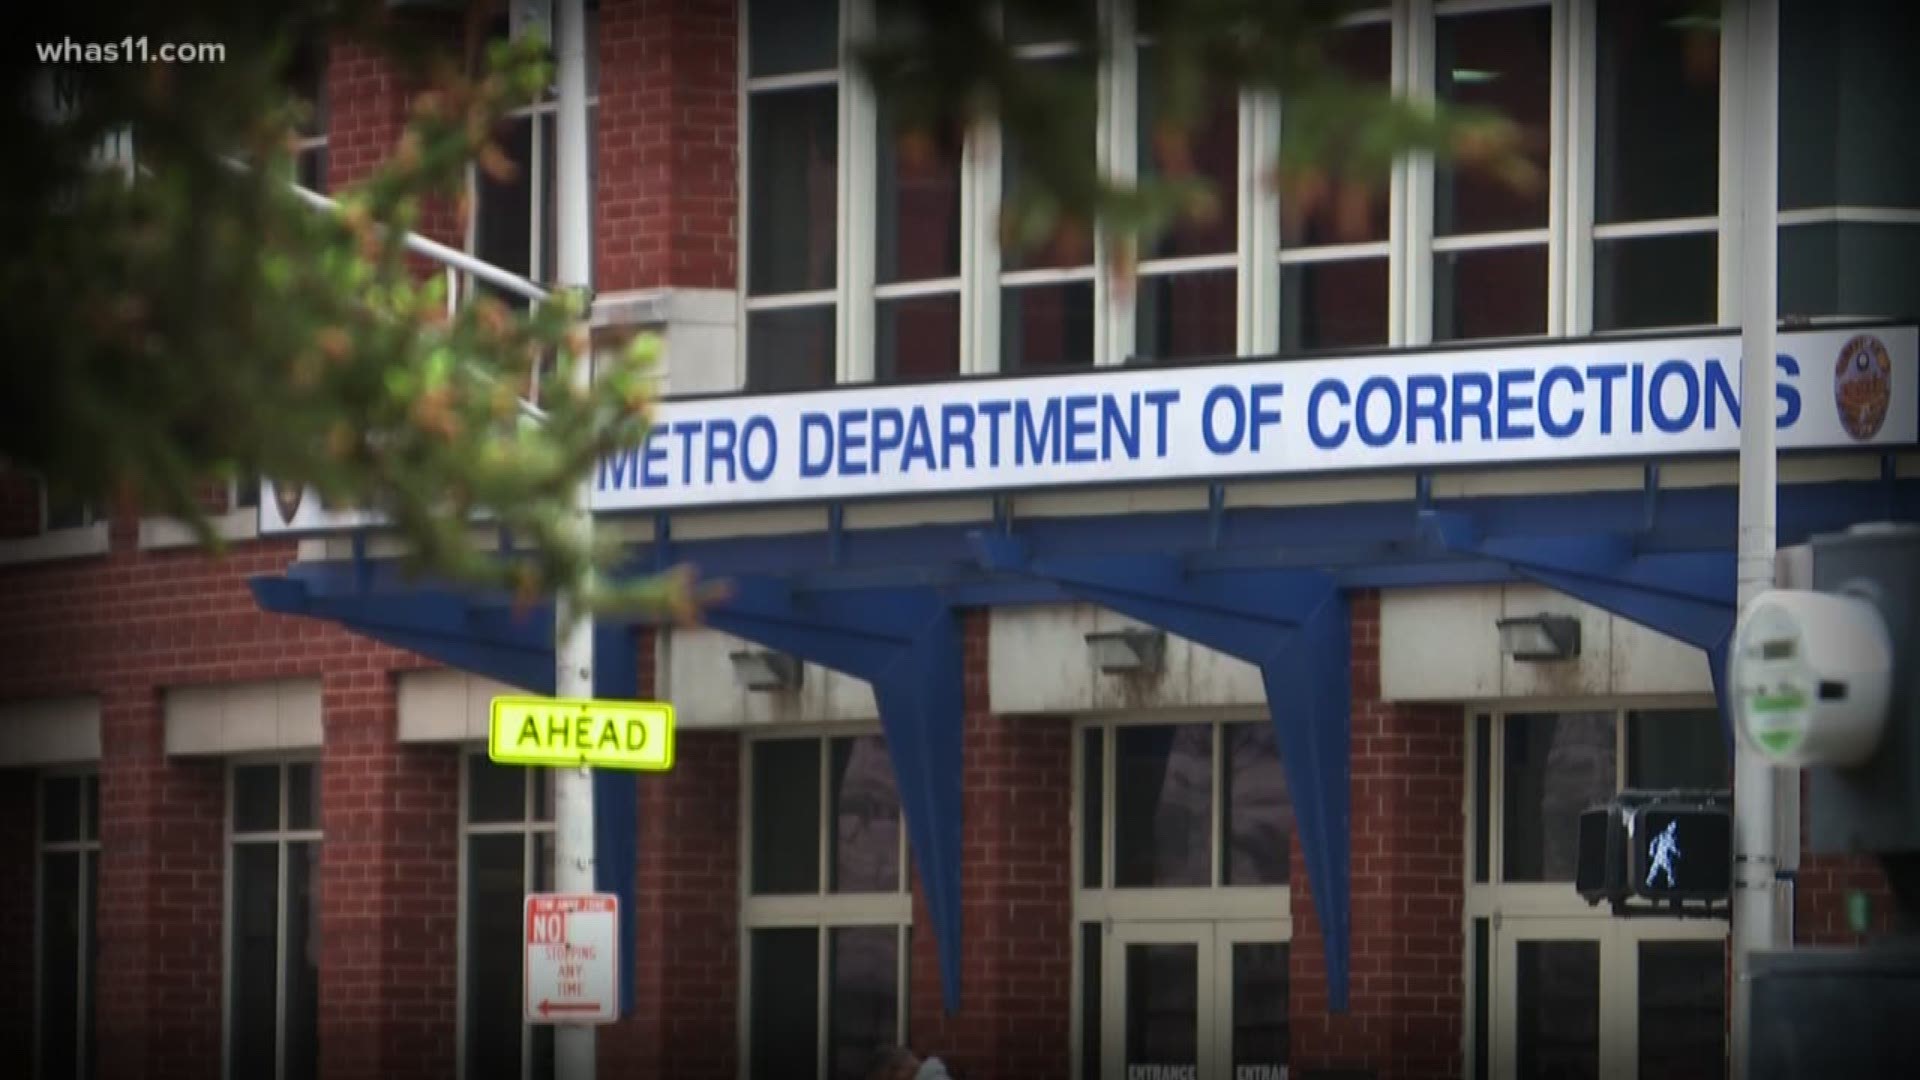 Tired of lengthy Professional Standards Unit investigations, Metro Corrections officers took a stand.